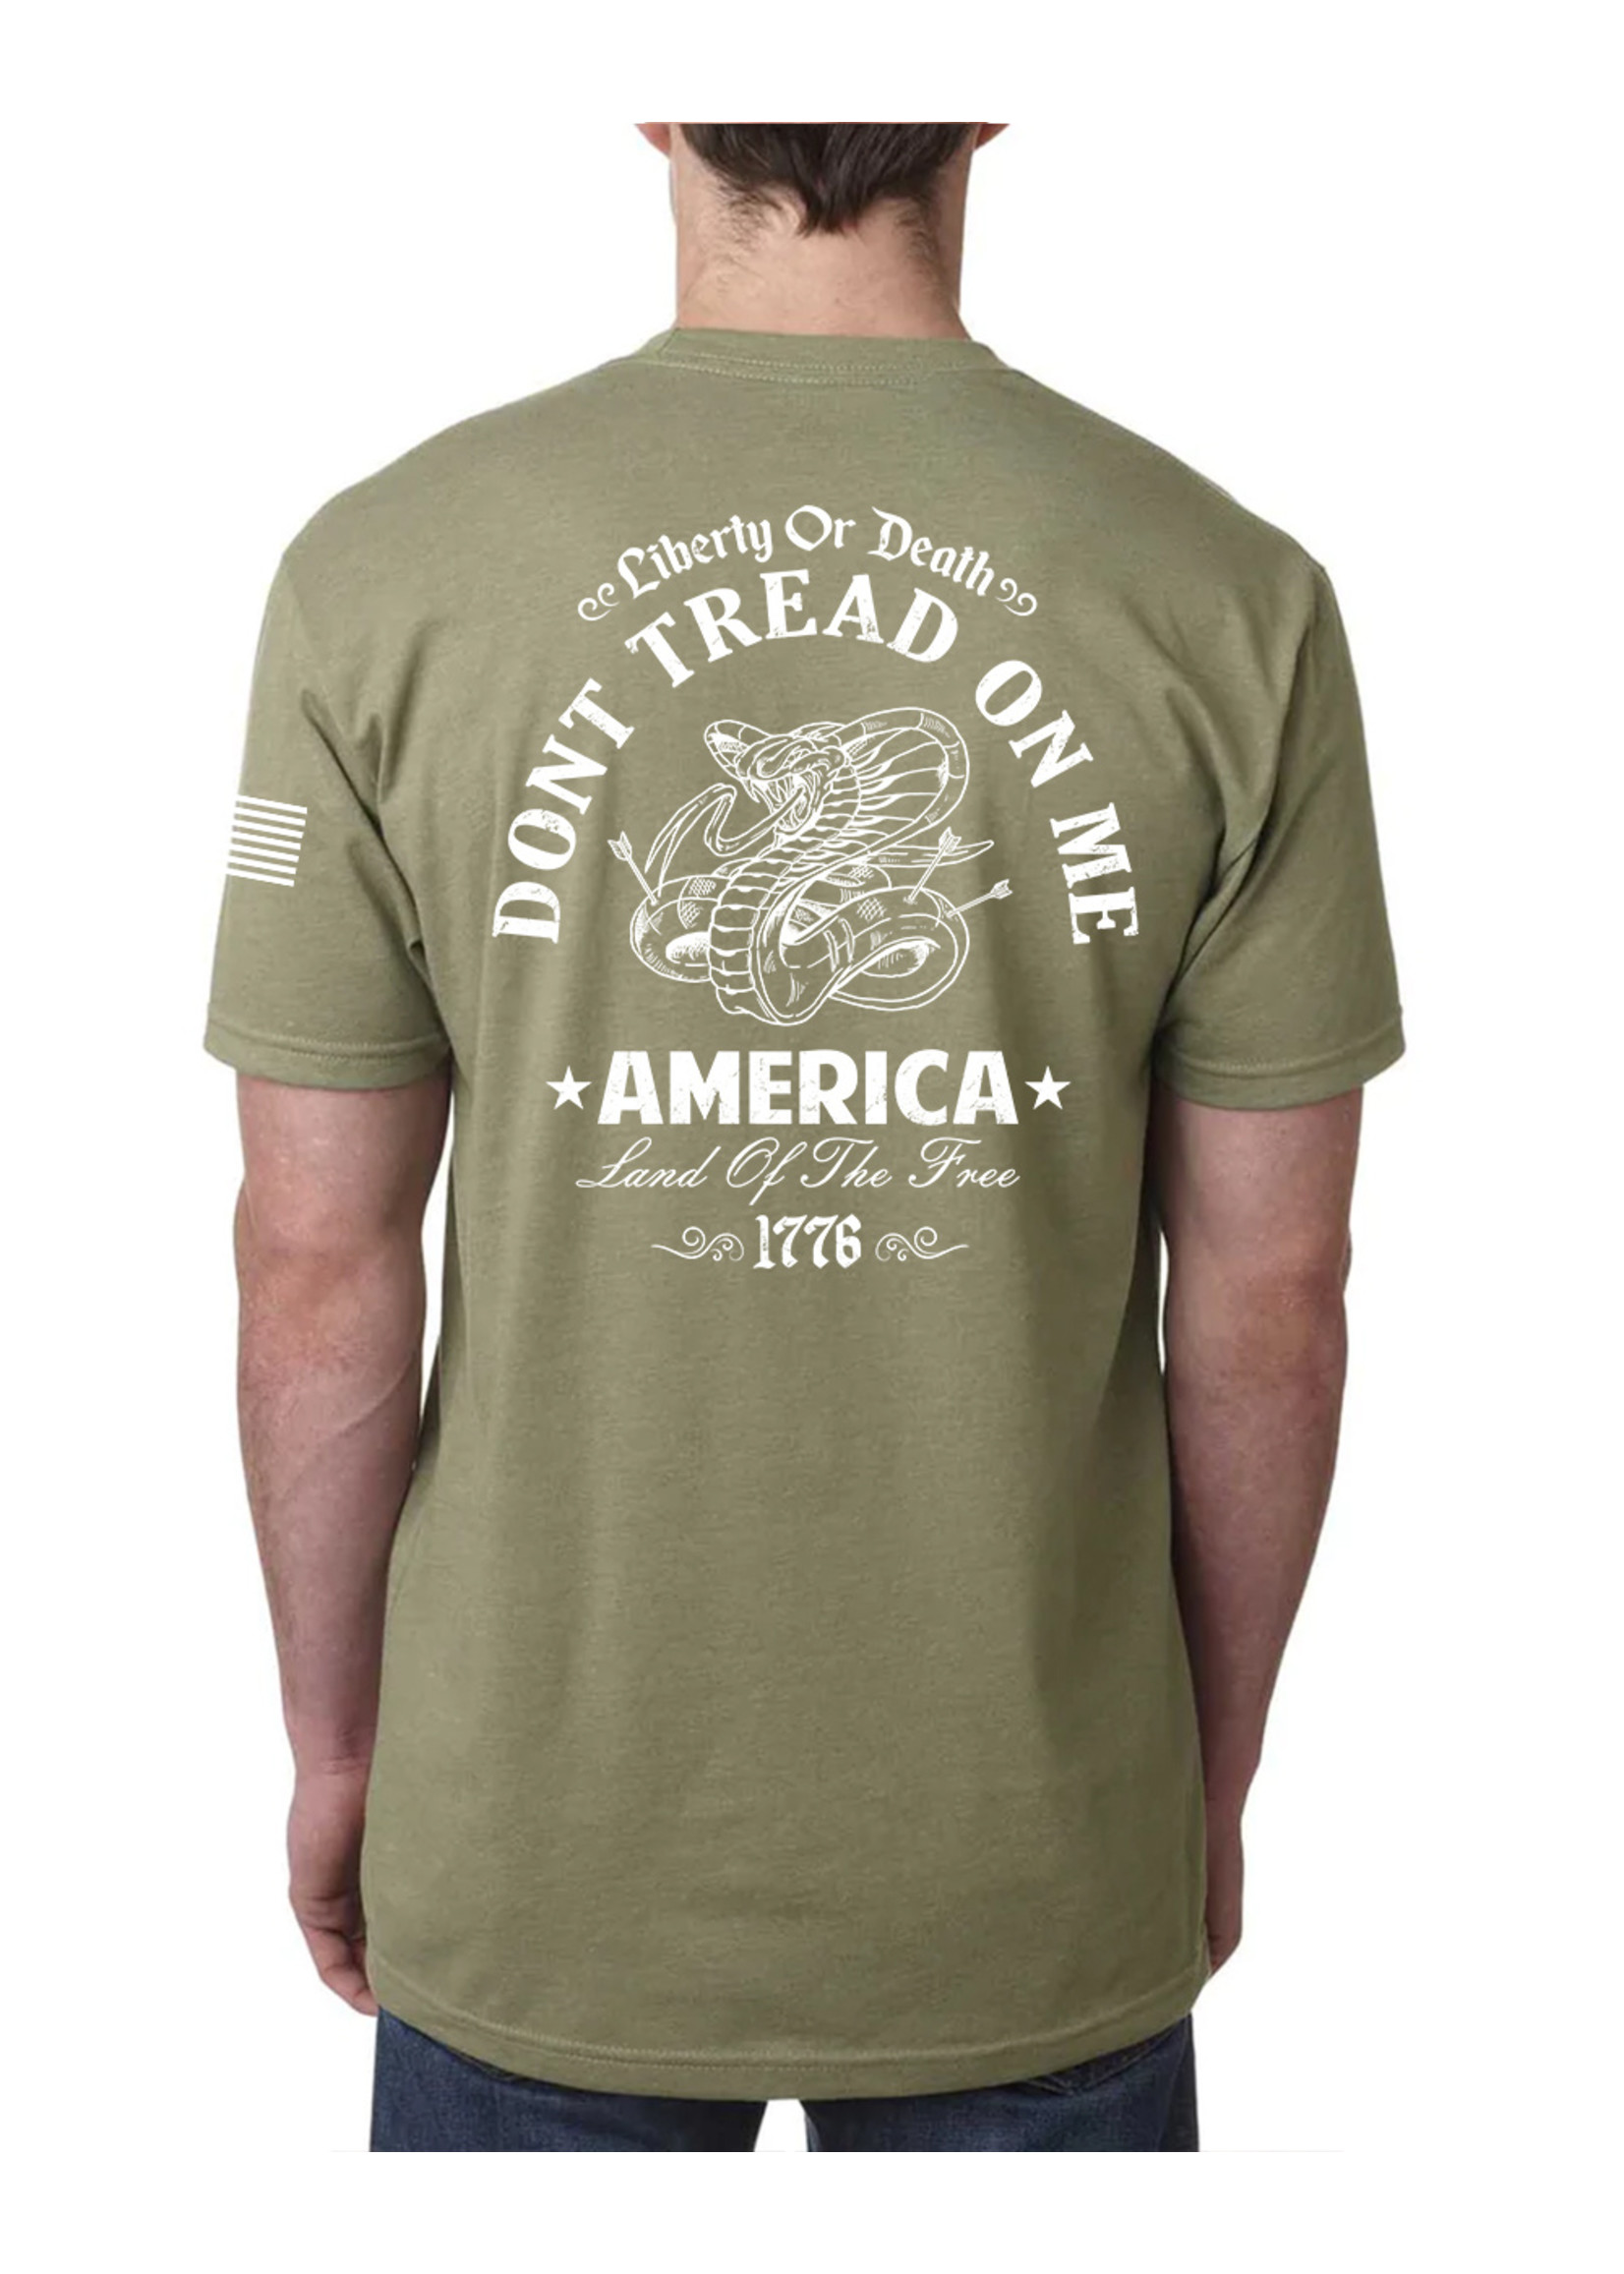 Don't Tread On Me 1776 T-Shirt | Defender Outdoors - Defender Outdoors